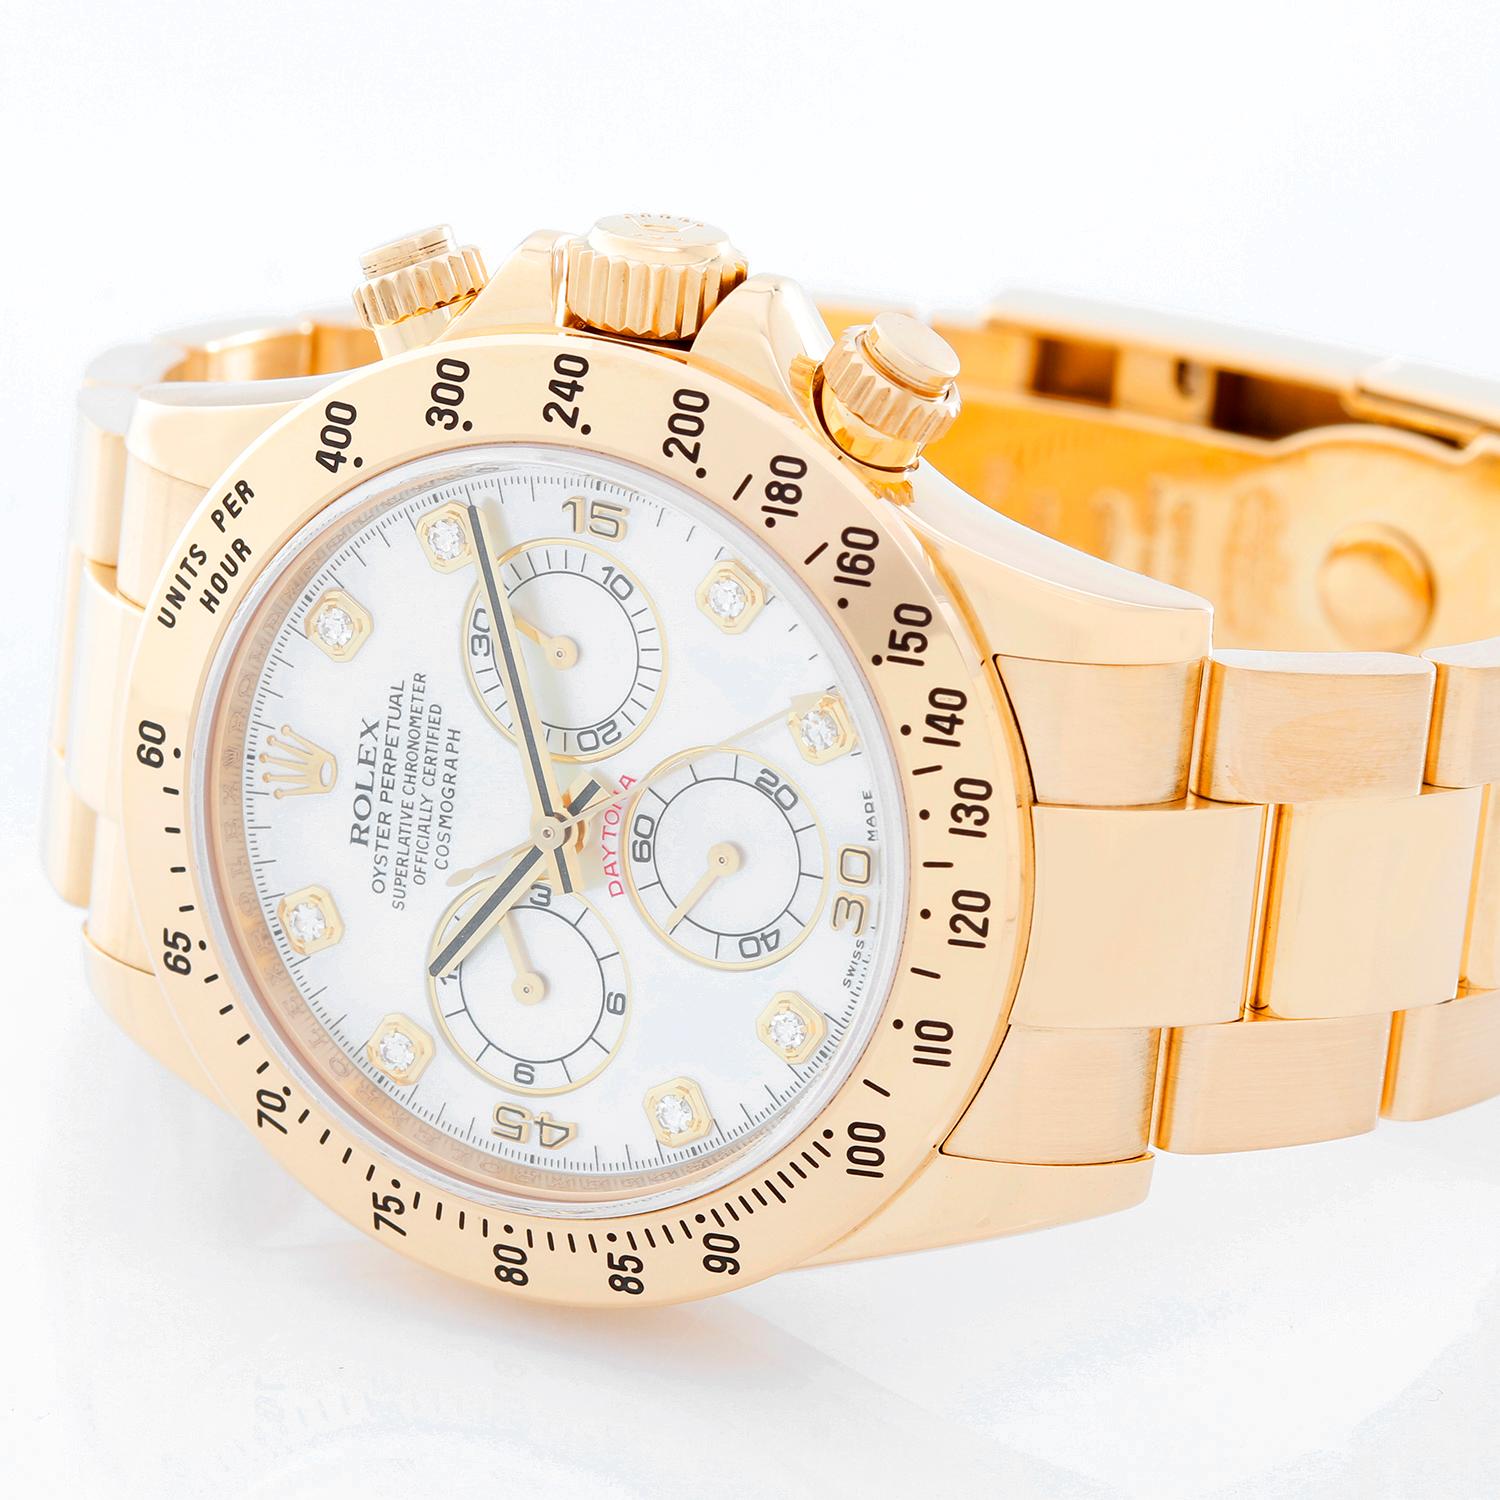 Rolex Cosmograph Daytona Men's Watch 116528 - Automatic winding, chronograph, 44 jewels, sapphire crystal. 18k yellow gold case and bezel  . Factory Mother of Pearl with diamond hour markers . 18k yellow gold Oyster bracelet with flip-lock clasp.